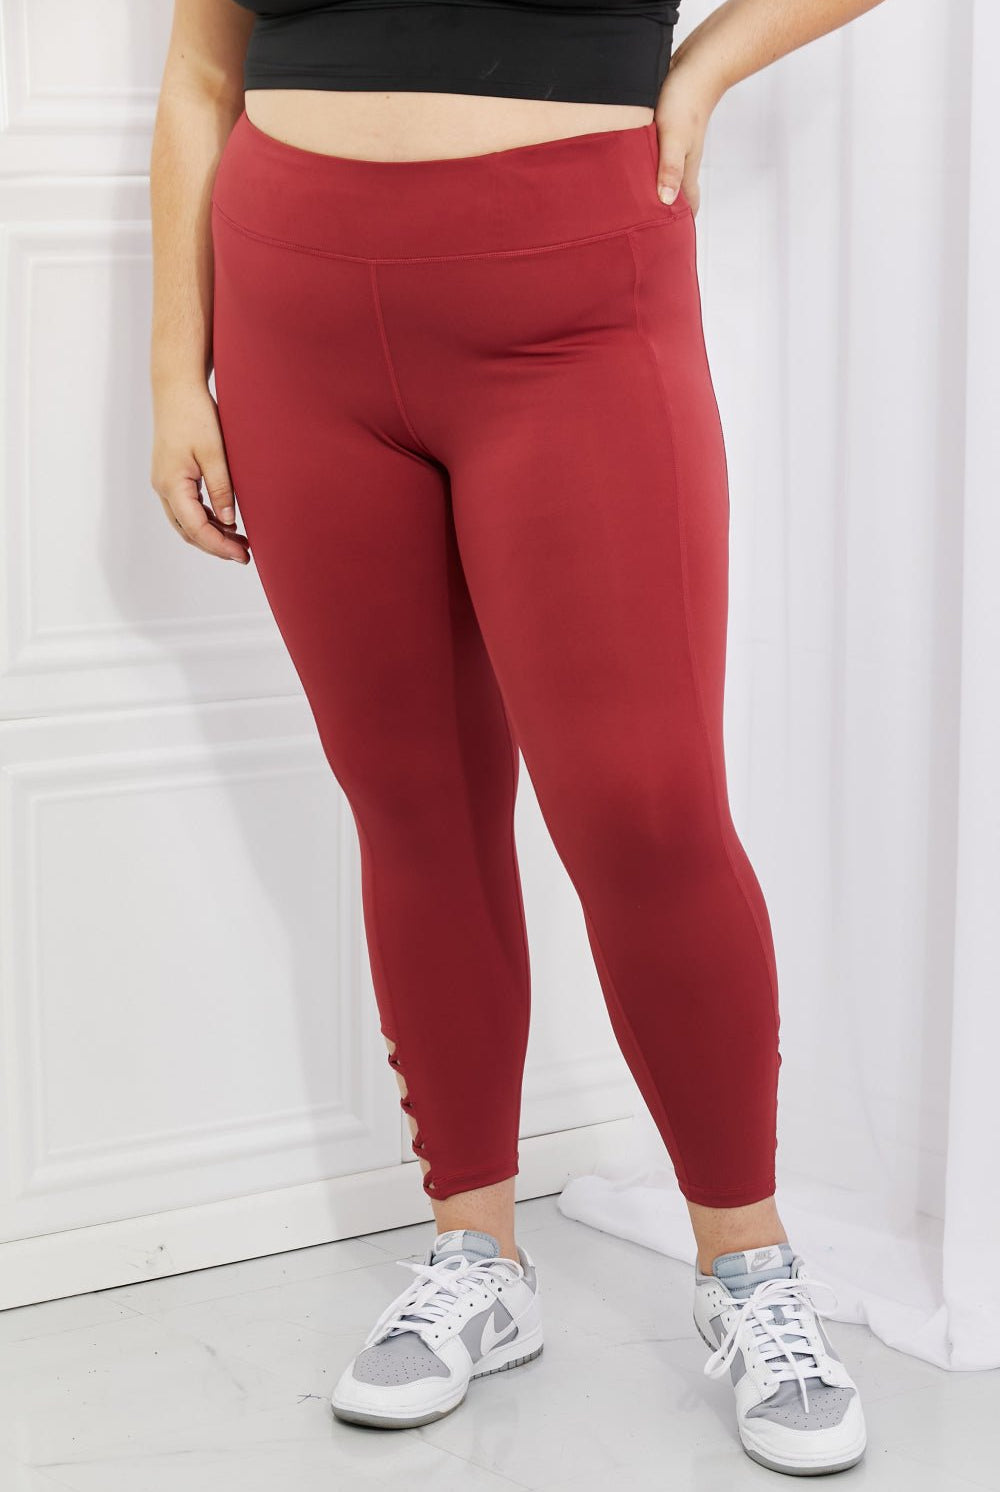 Yelete Ready For Action Full Size Ankle Cutout Active Leggings in Brick Red - GemThreads Boutique